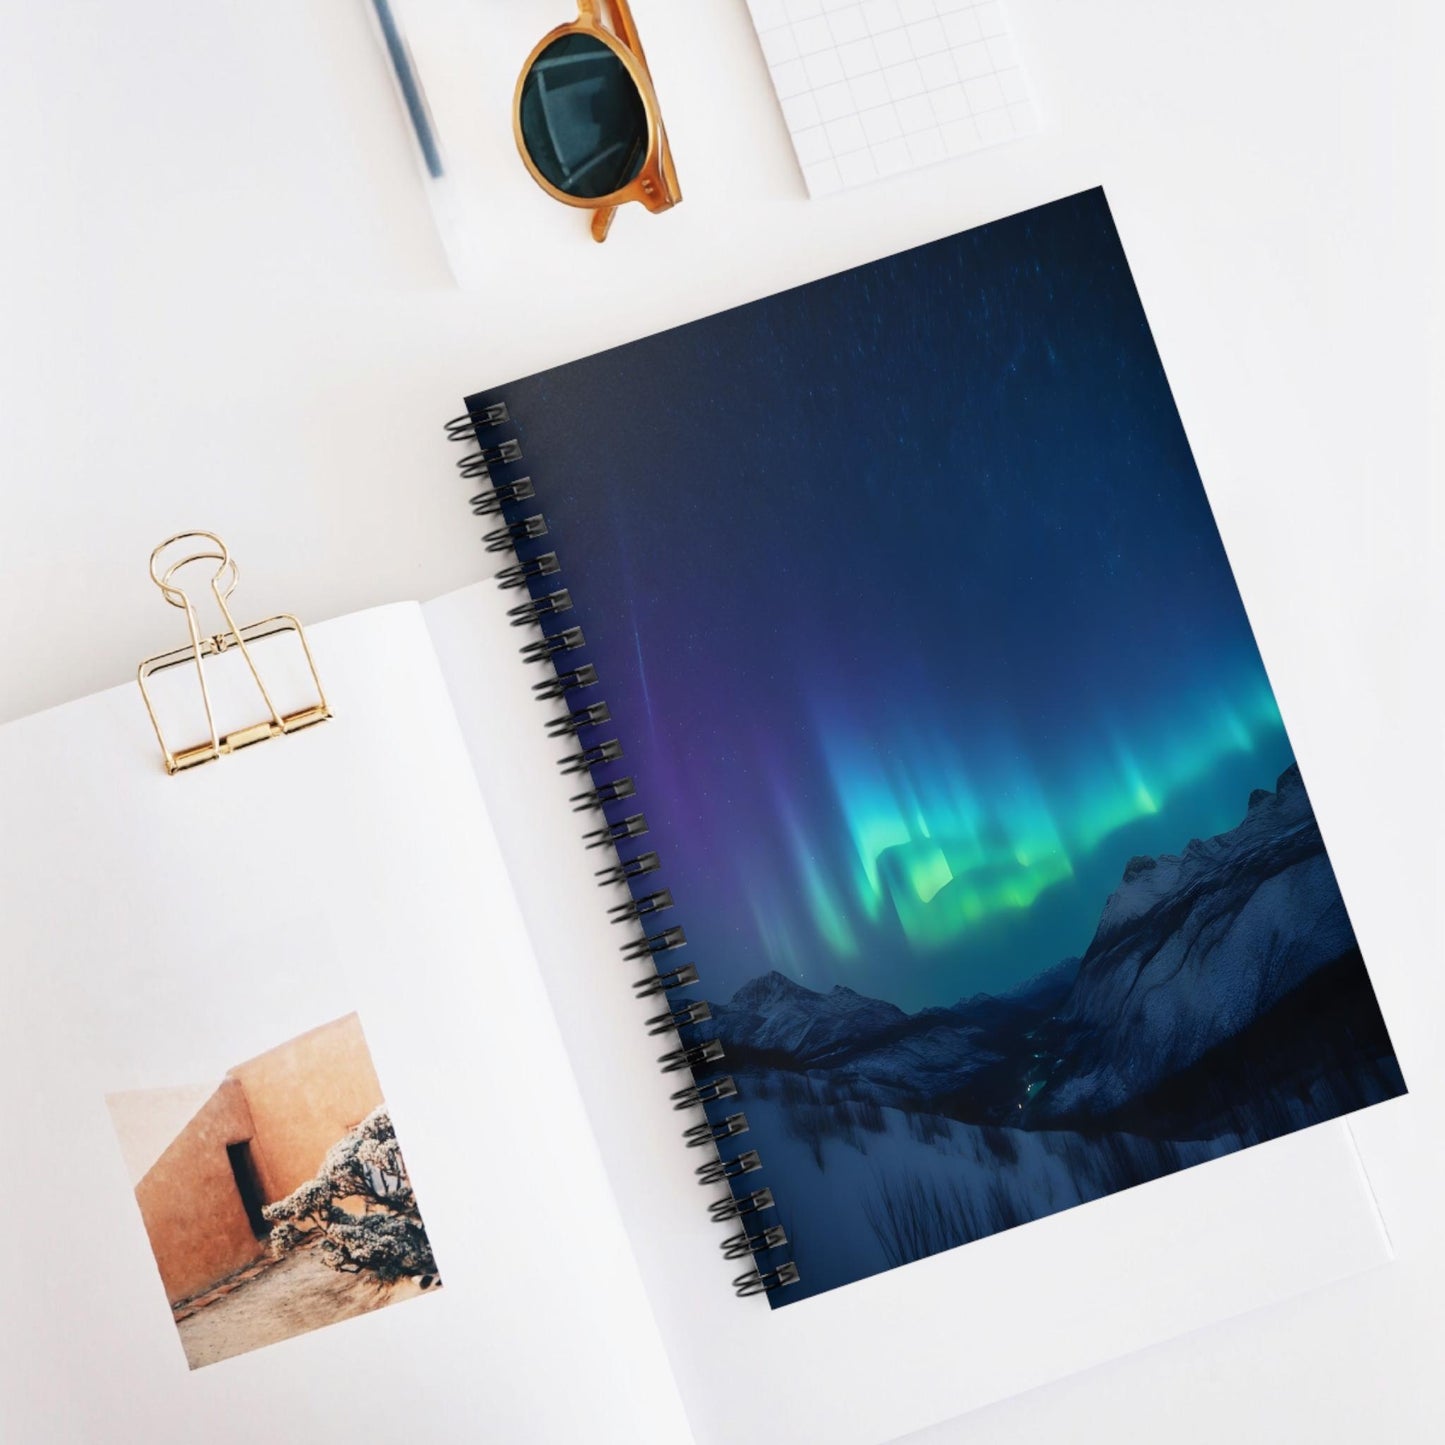 Unique Aurora Borealis Spiral Notebook Ruled Line - Personalized Northern Light View - Stationary Accessories - Perfect Aurora Lovers Gift 33